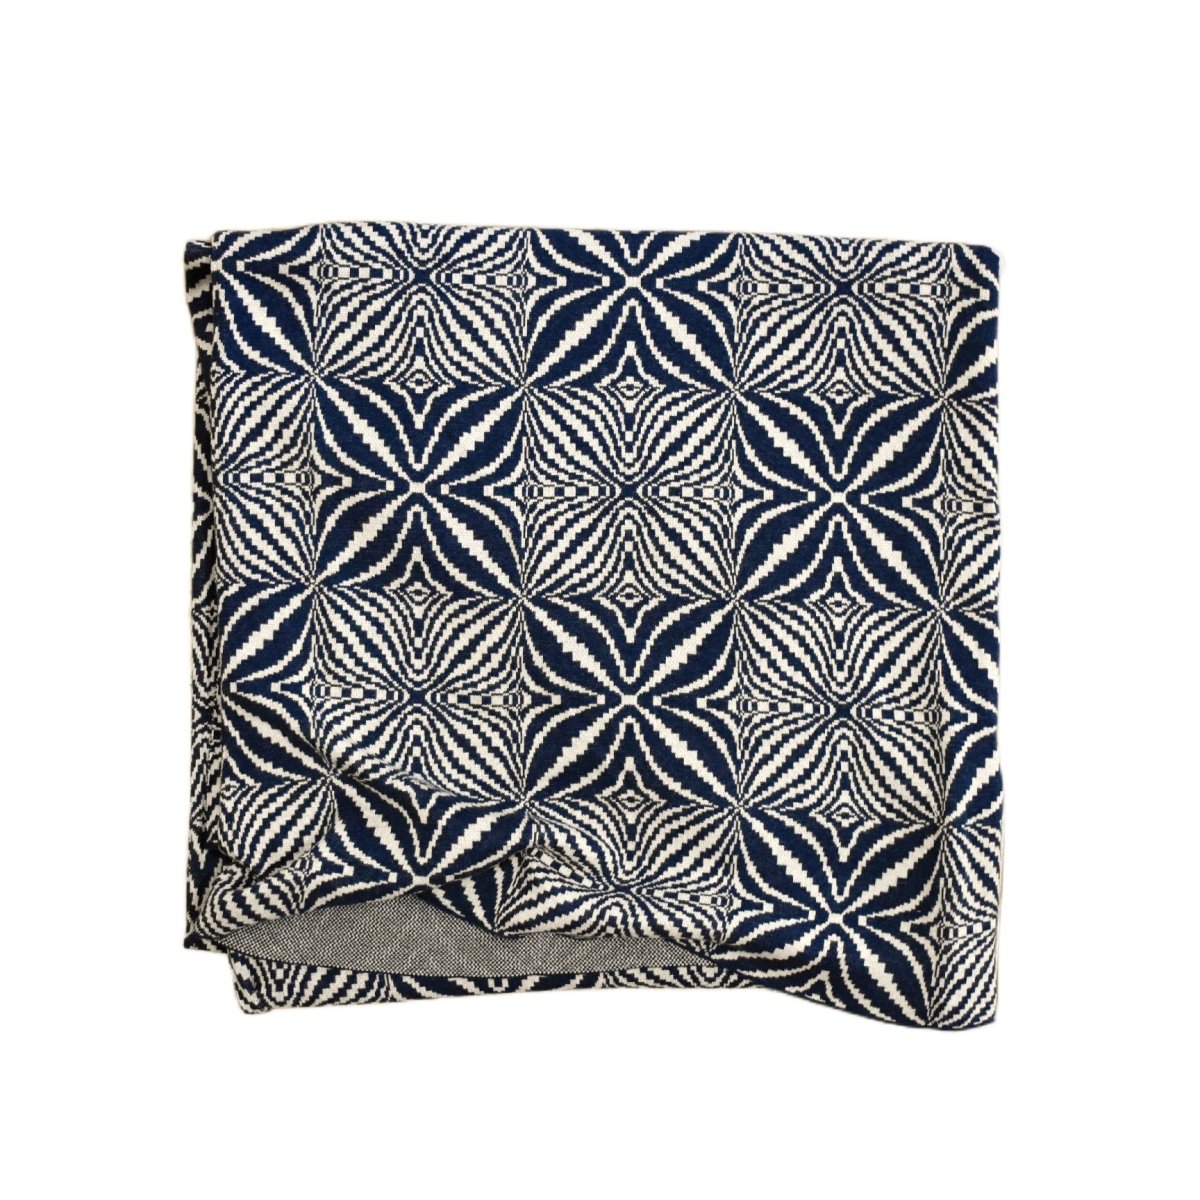 Bow Knot Check Blanket - Navy - SpaceHavenHome